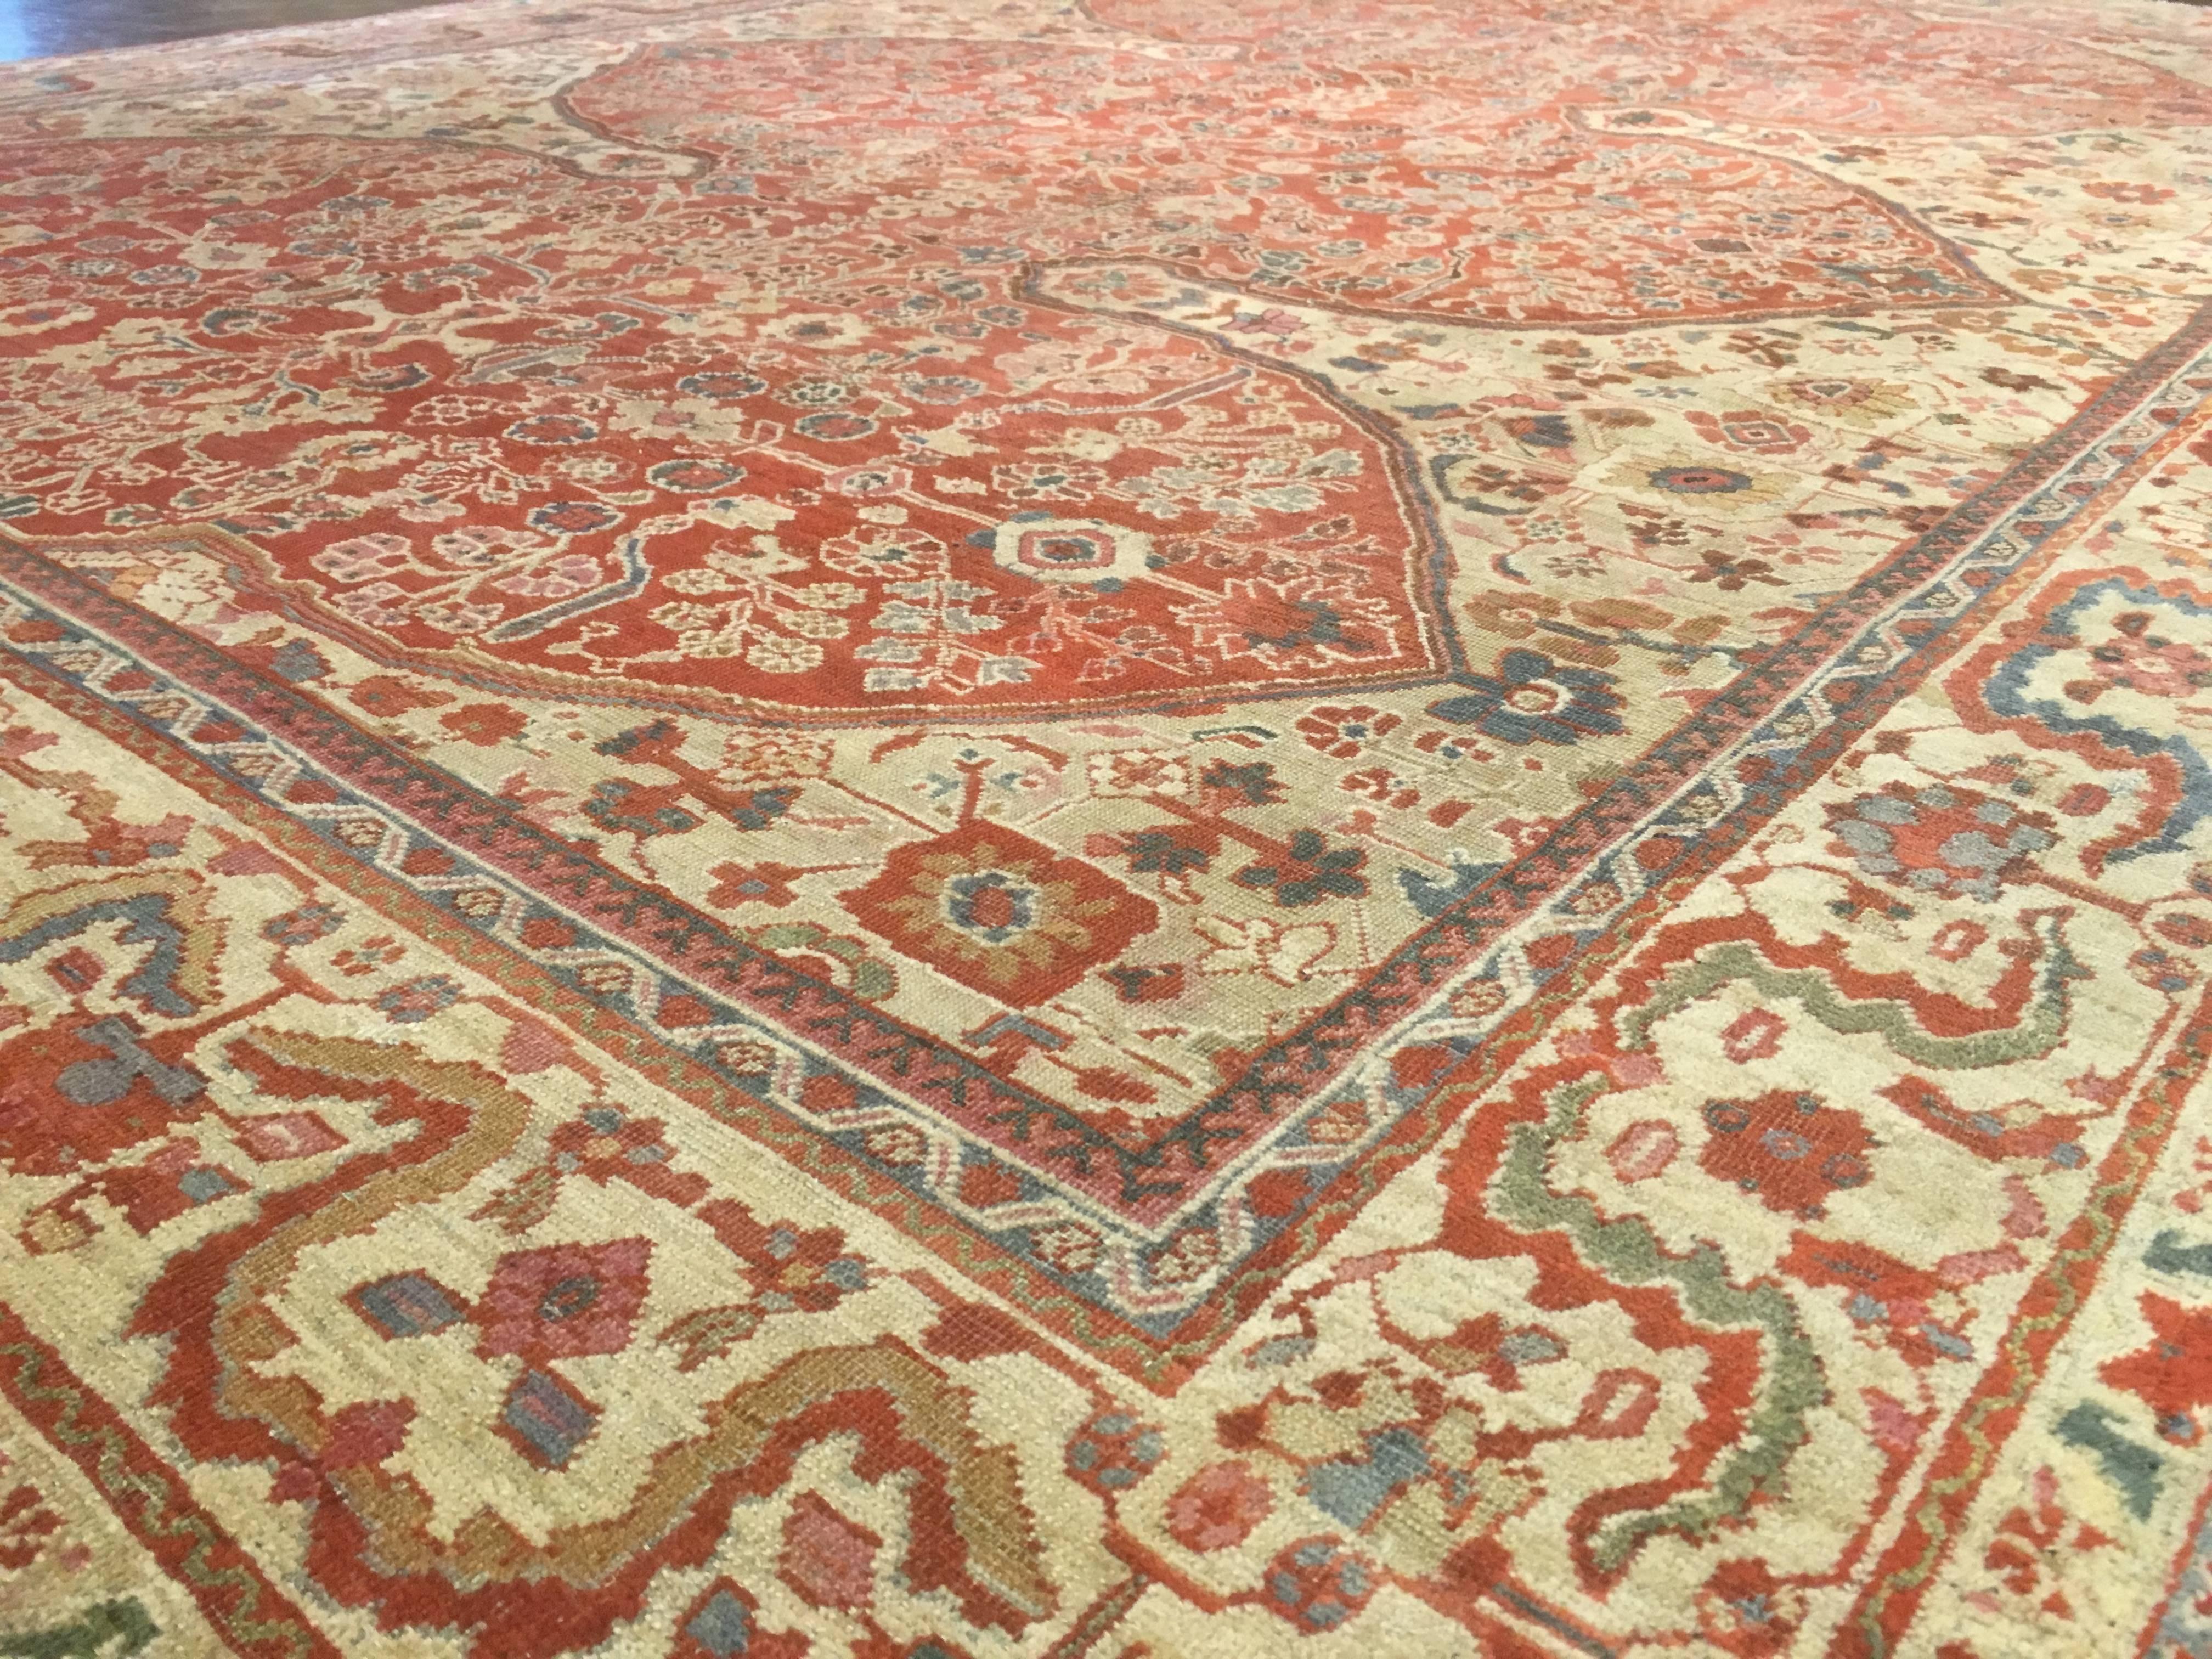 Extremely rare design woven in late 19th century Sultanabad. This rug has a tighter than normal weave for a rug of that region, This type of rug is sometimes referred to as a Farahan. The condition is good for its age and has an even low cut pile